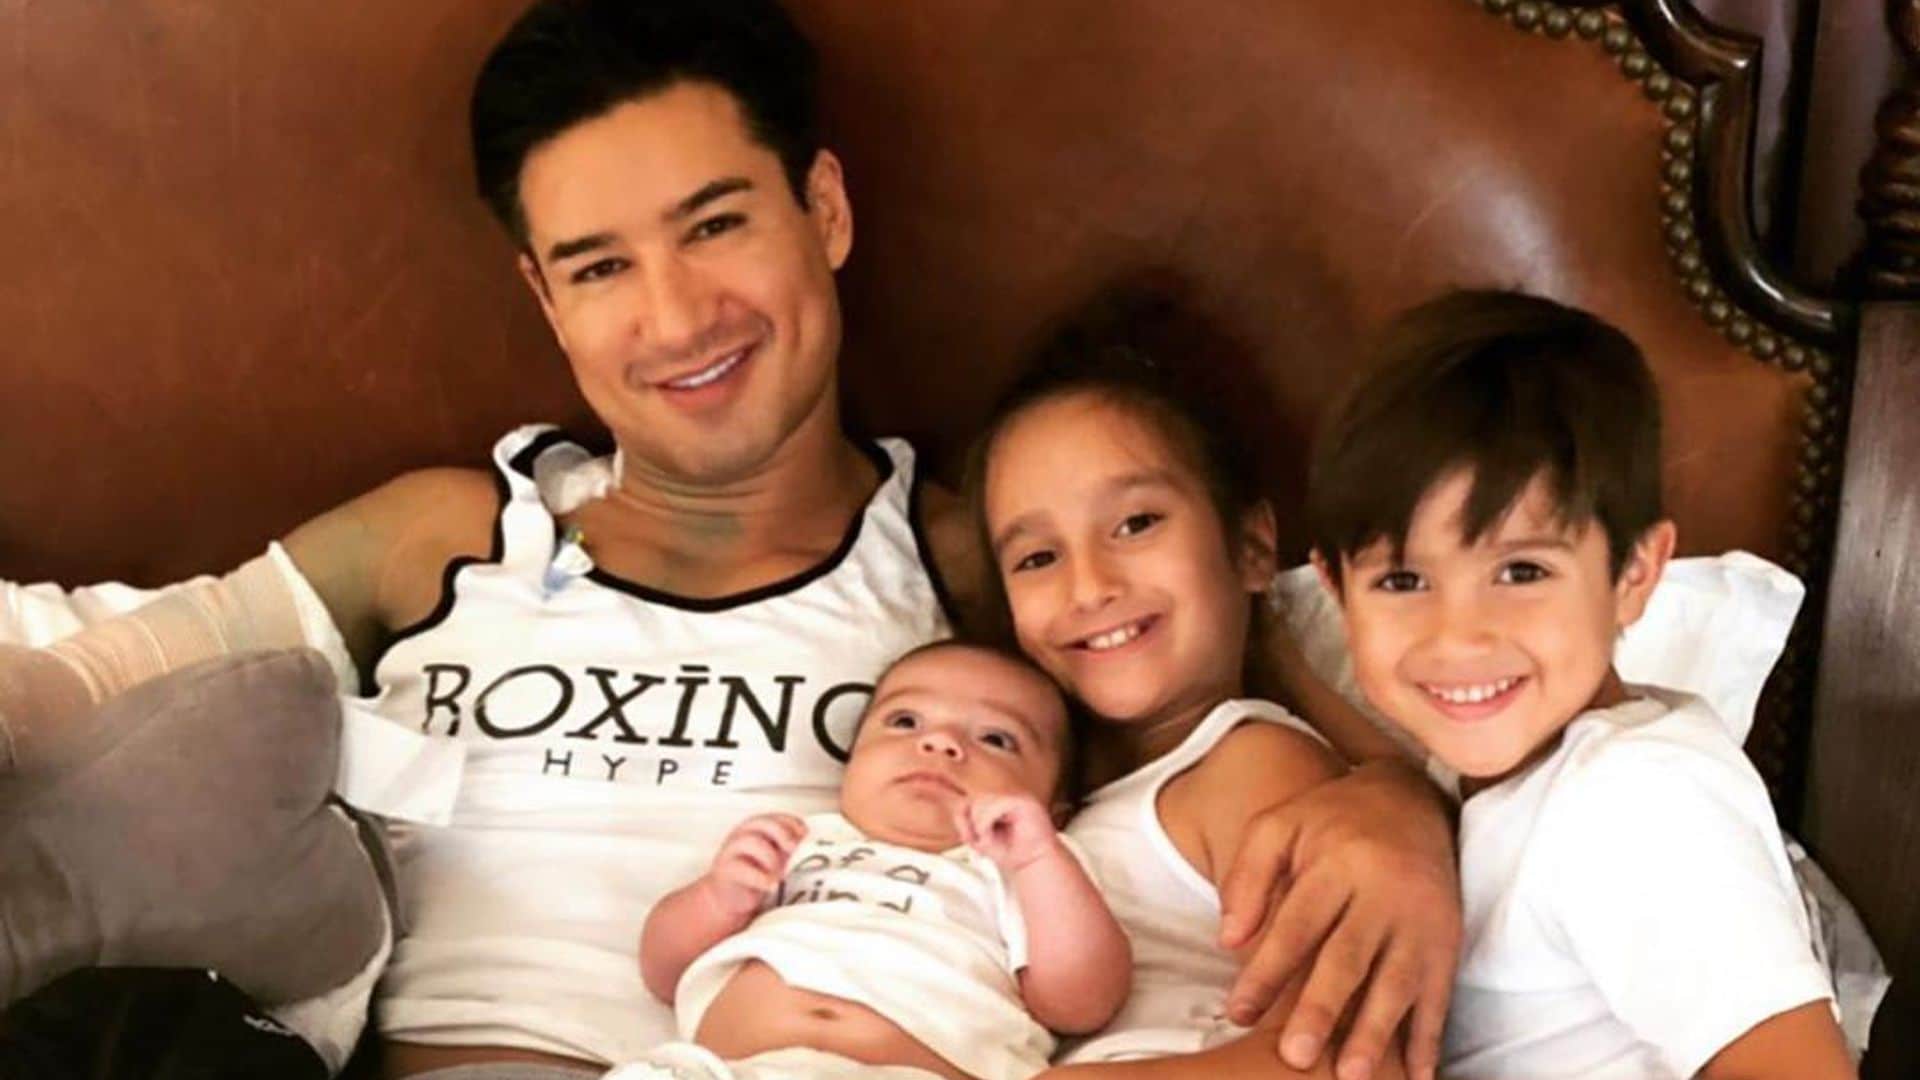 Mario Lopez celebrates this huge milestone moment for son Dominic with an adorable cap and gown ceremony